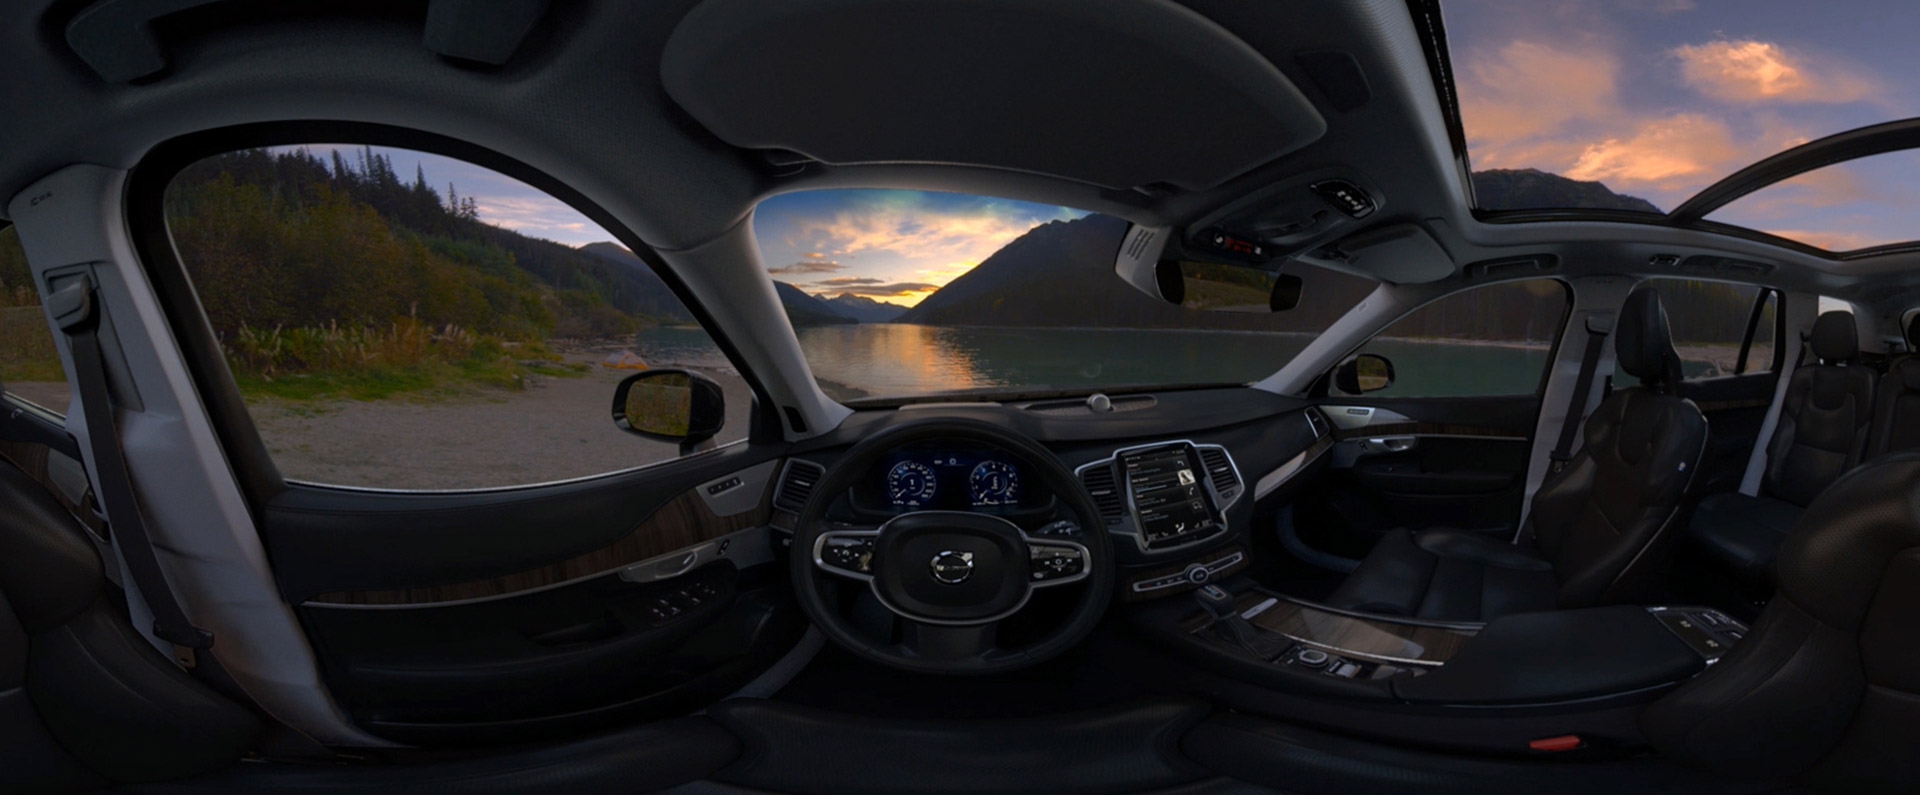 The interior of a Volvo car showing a beautiful landscape outside the windows.